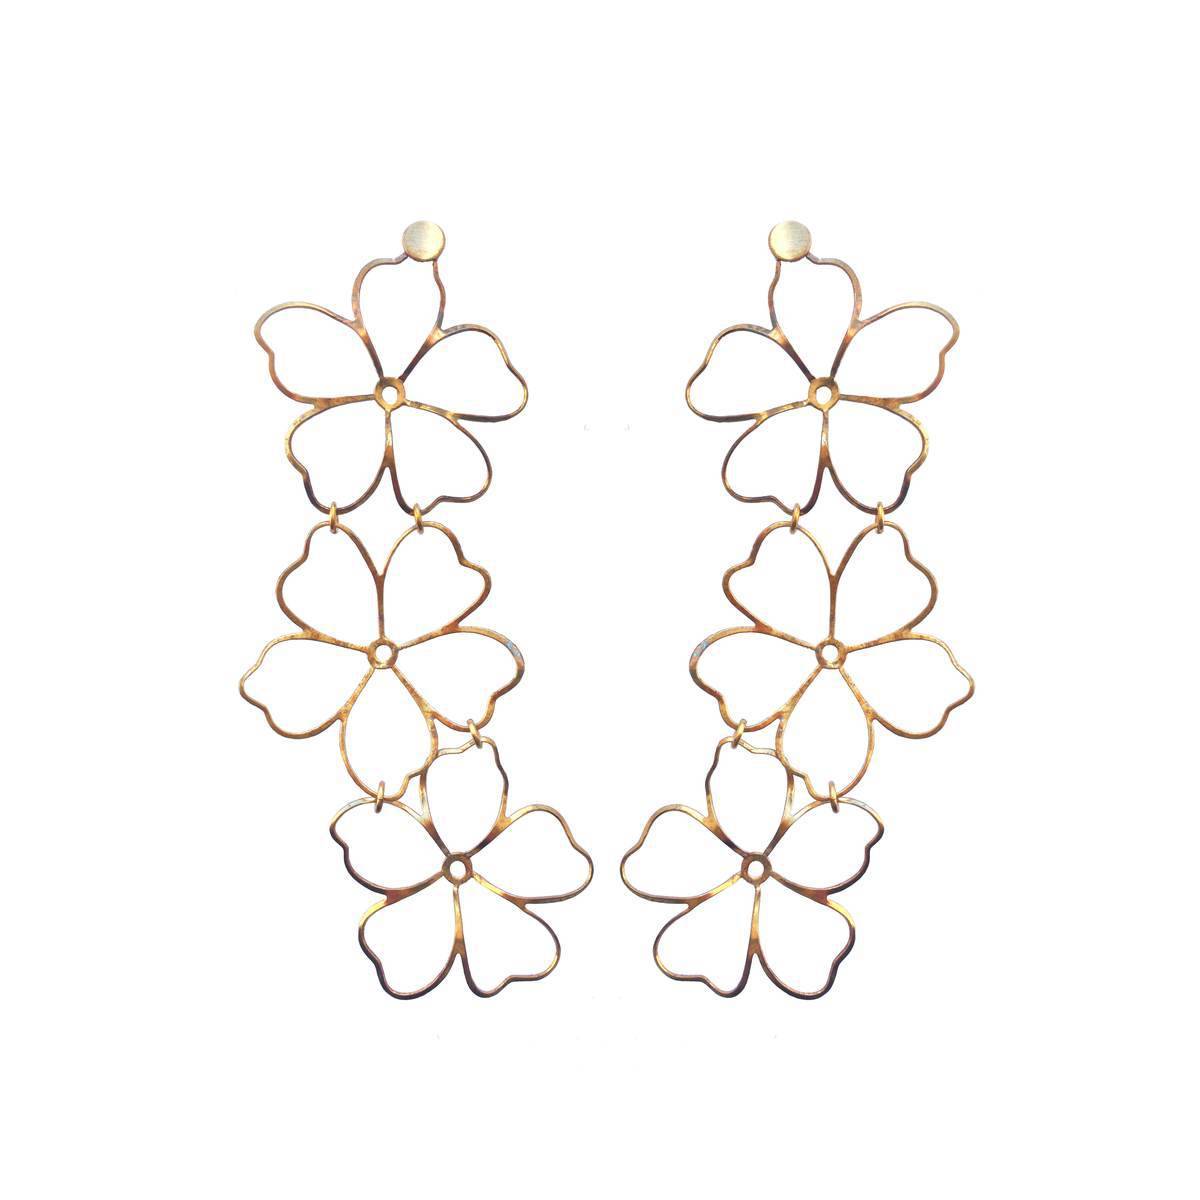 We Dream in Colour | Antheia earrings | gold